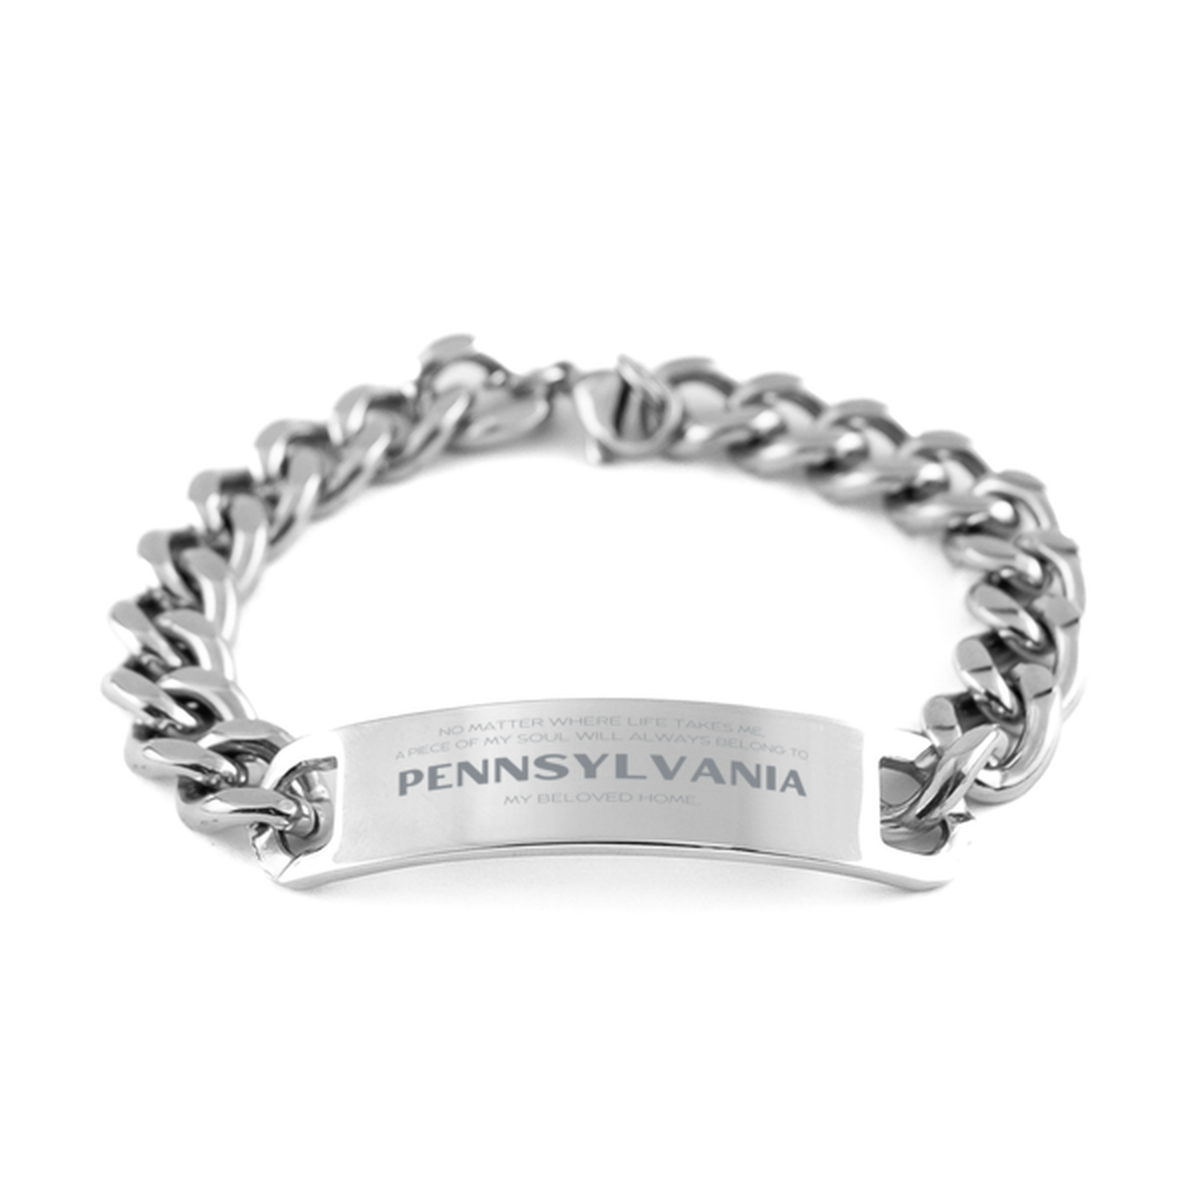 Love Pennsylvania State Gifts, My soul will always belong to Pennsylvania, Proud Cuban Chain Stainless Steel Bracelet, Birthday Unique Gifts For Pennsylvania Men, Women, Friends